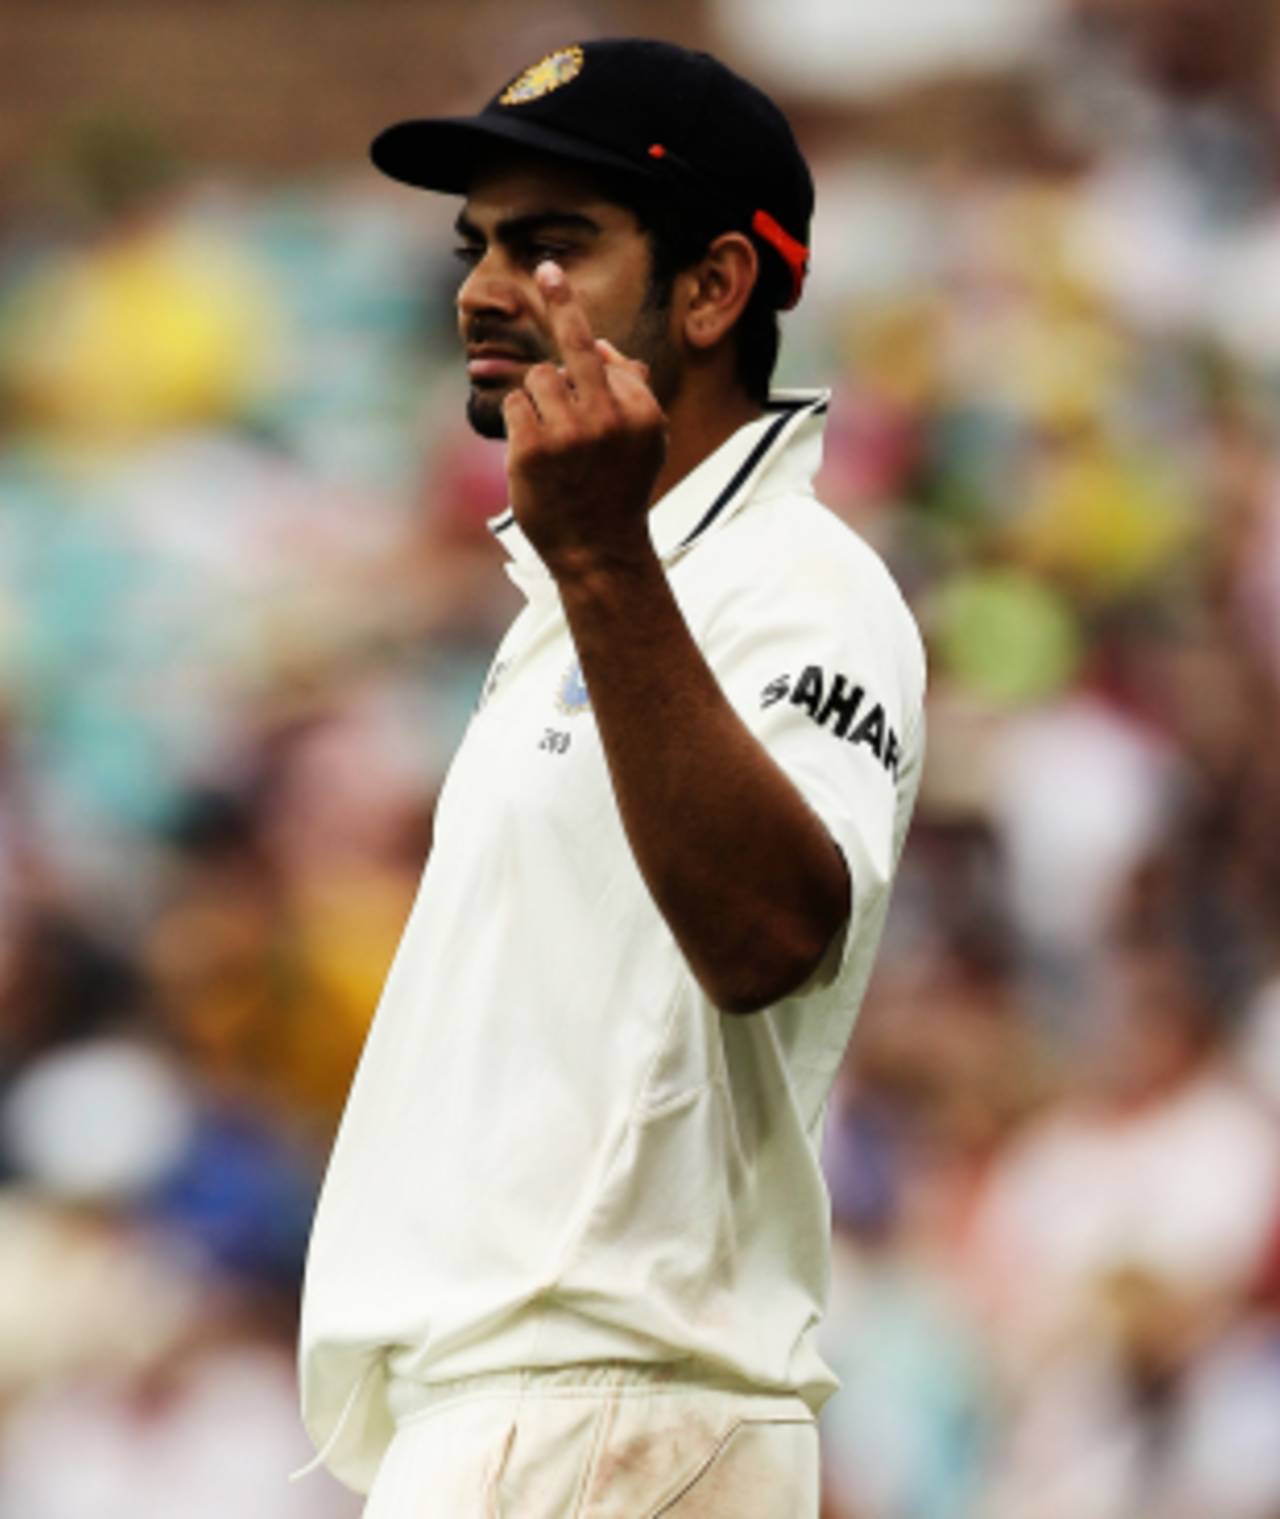 Virat Kohli gestures during a hard day in the field for India. He later tweeted that this was in response to provocation by the crowd, Australia v India, 2nd Test, Sydney, 2nd day, January 4, 2012